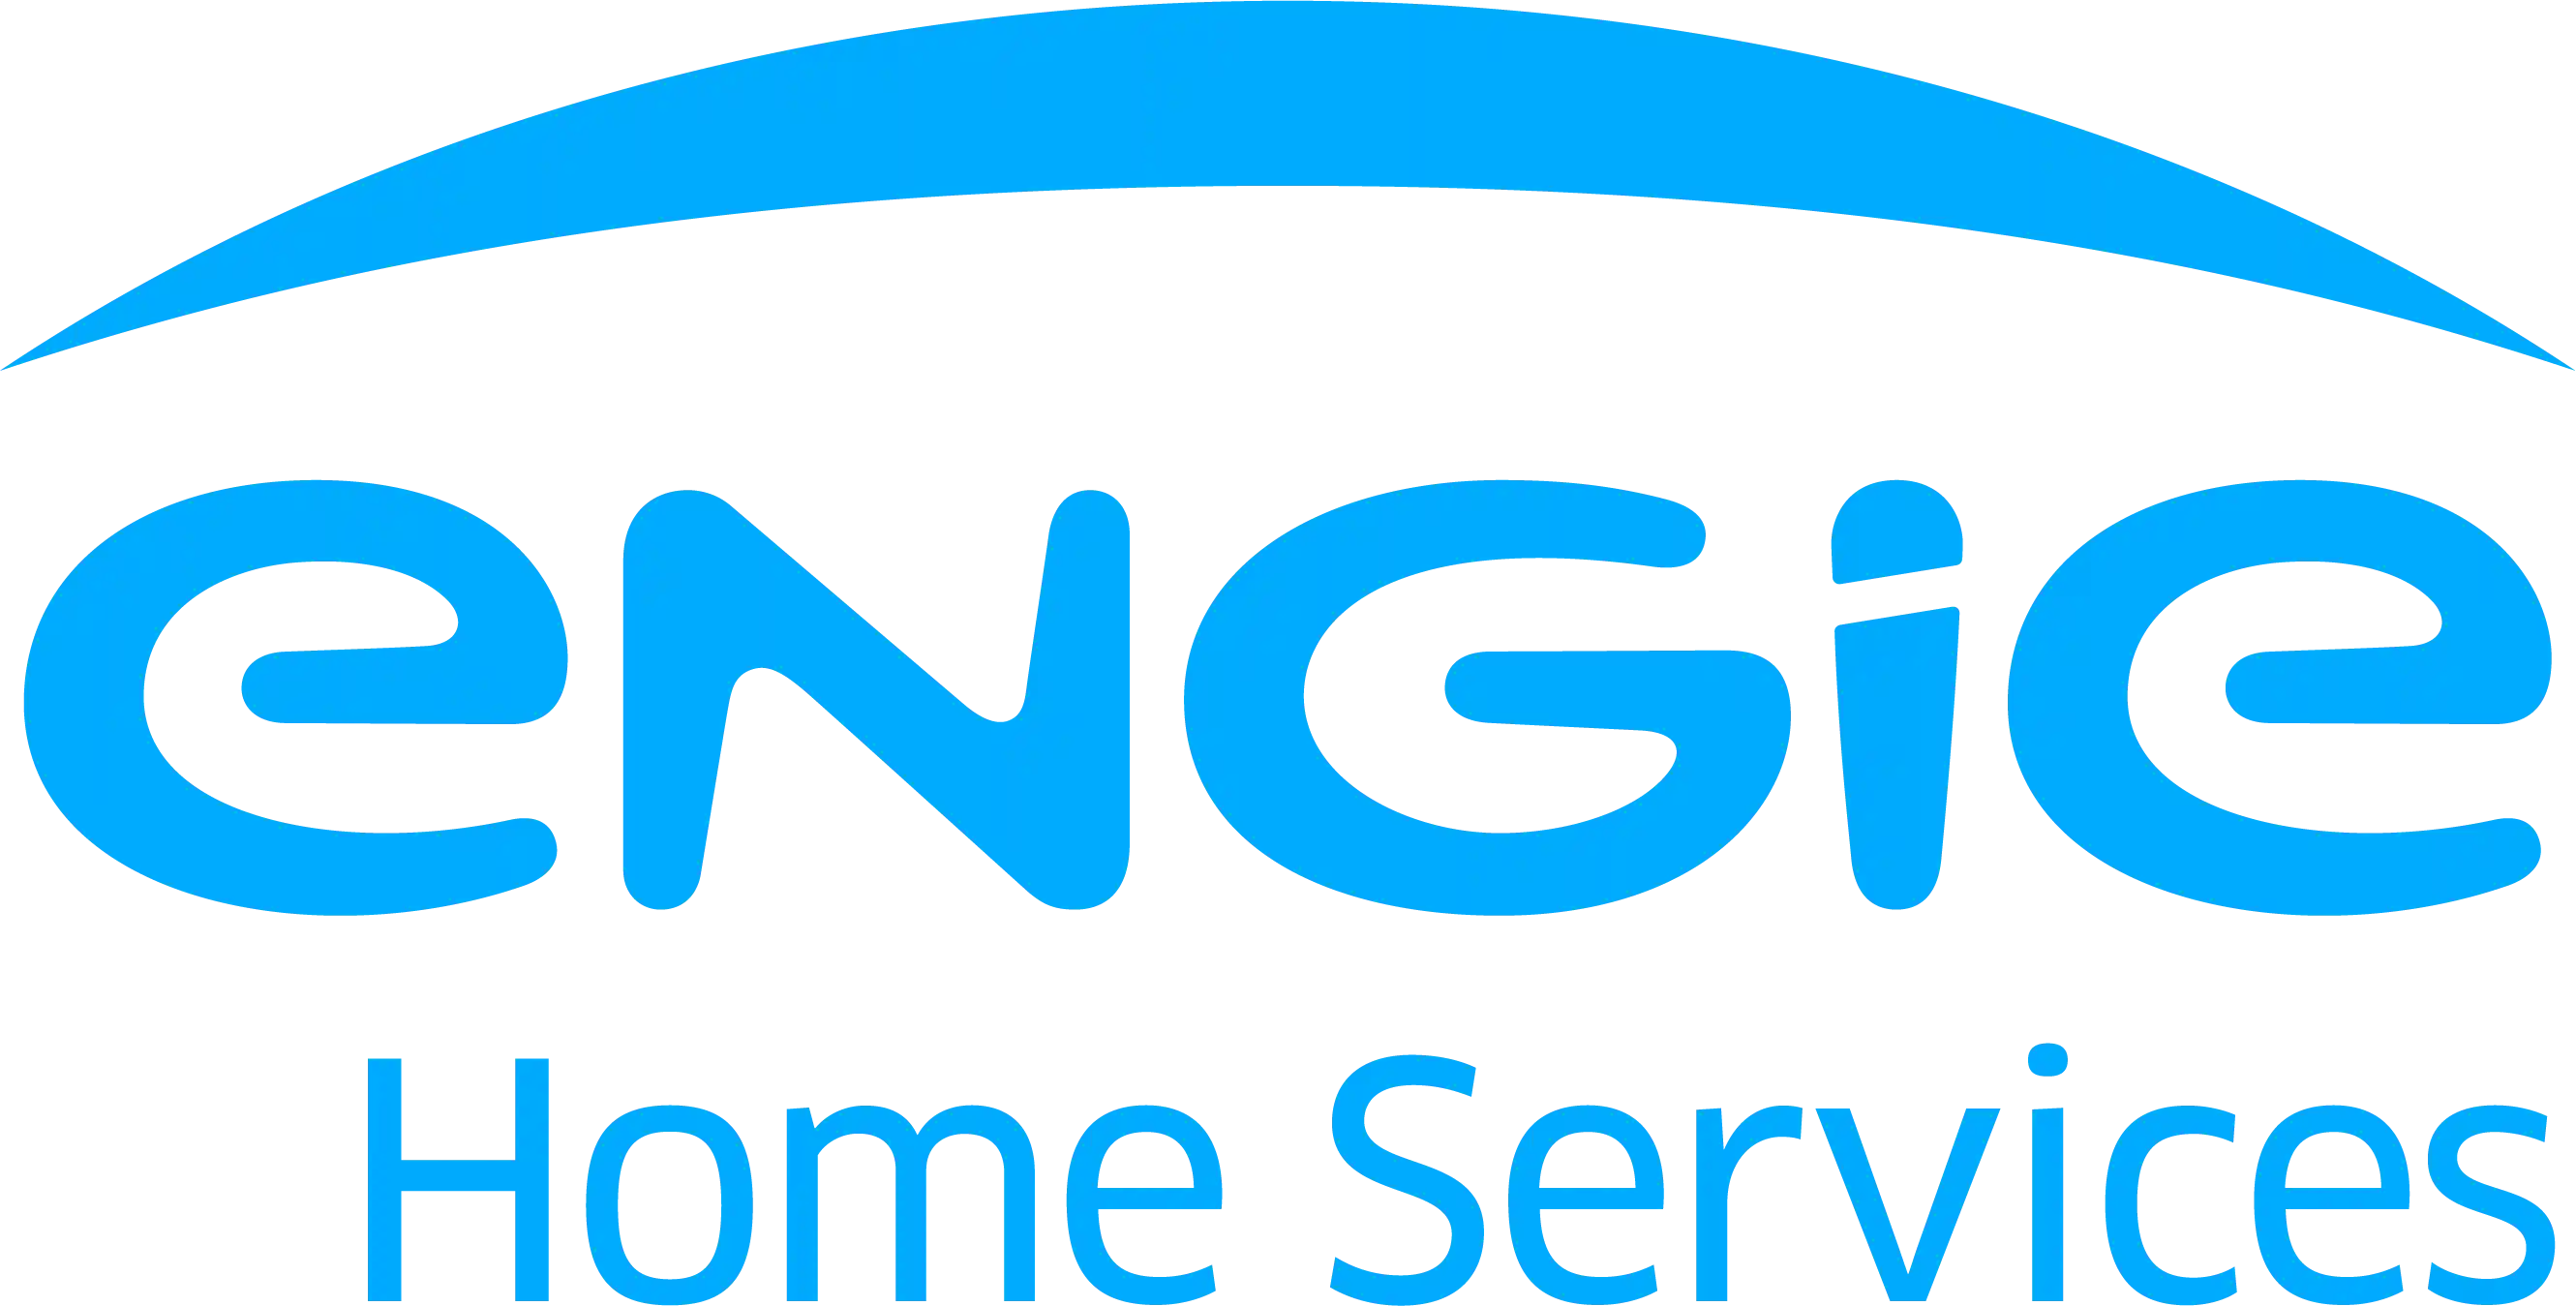 engie-homeservices.fr